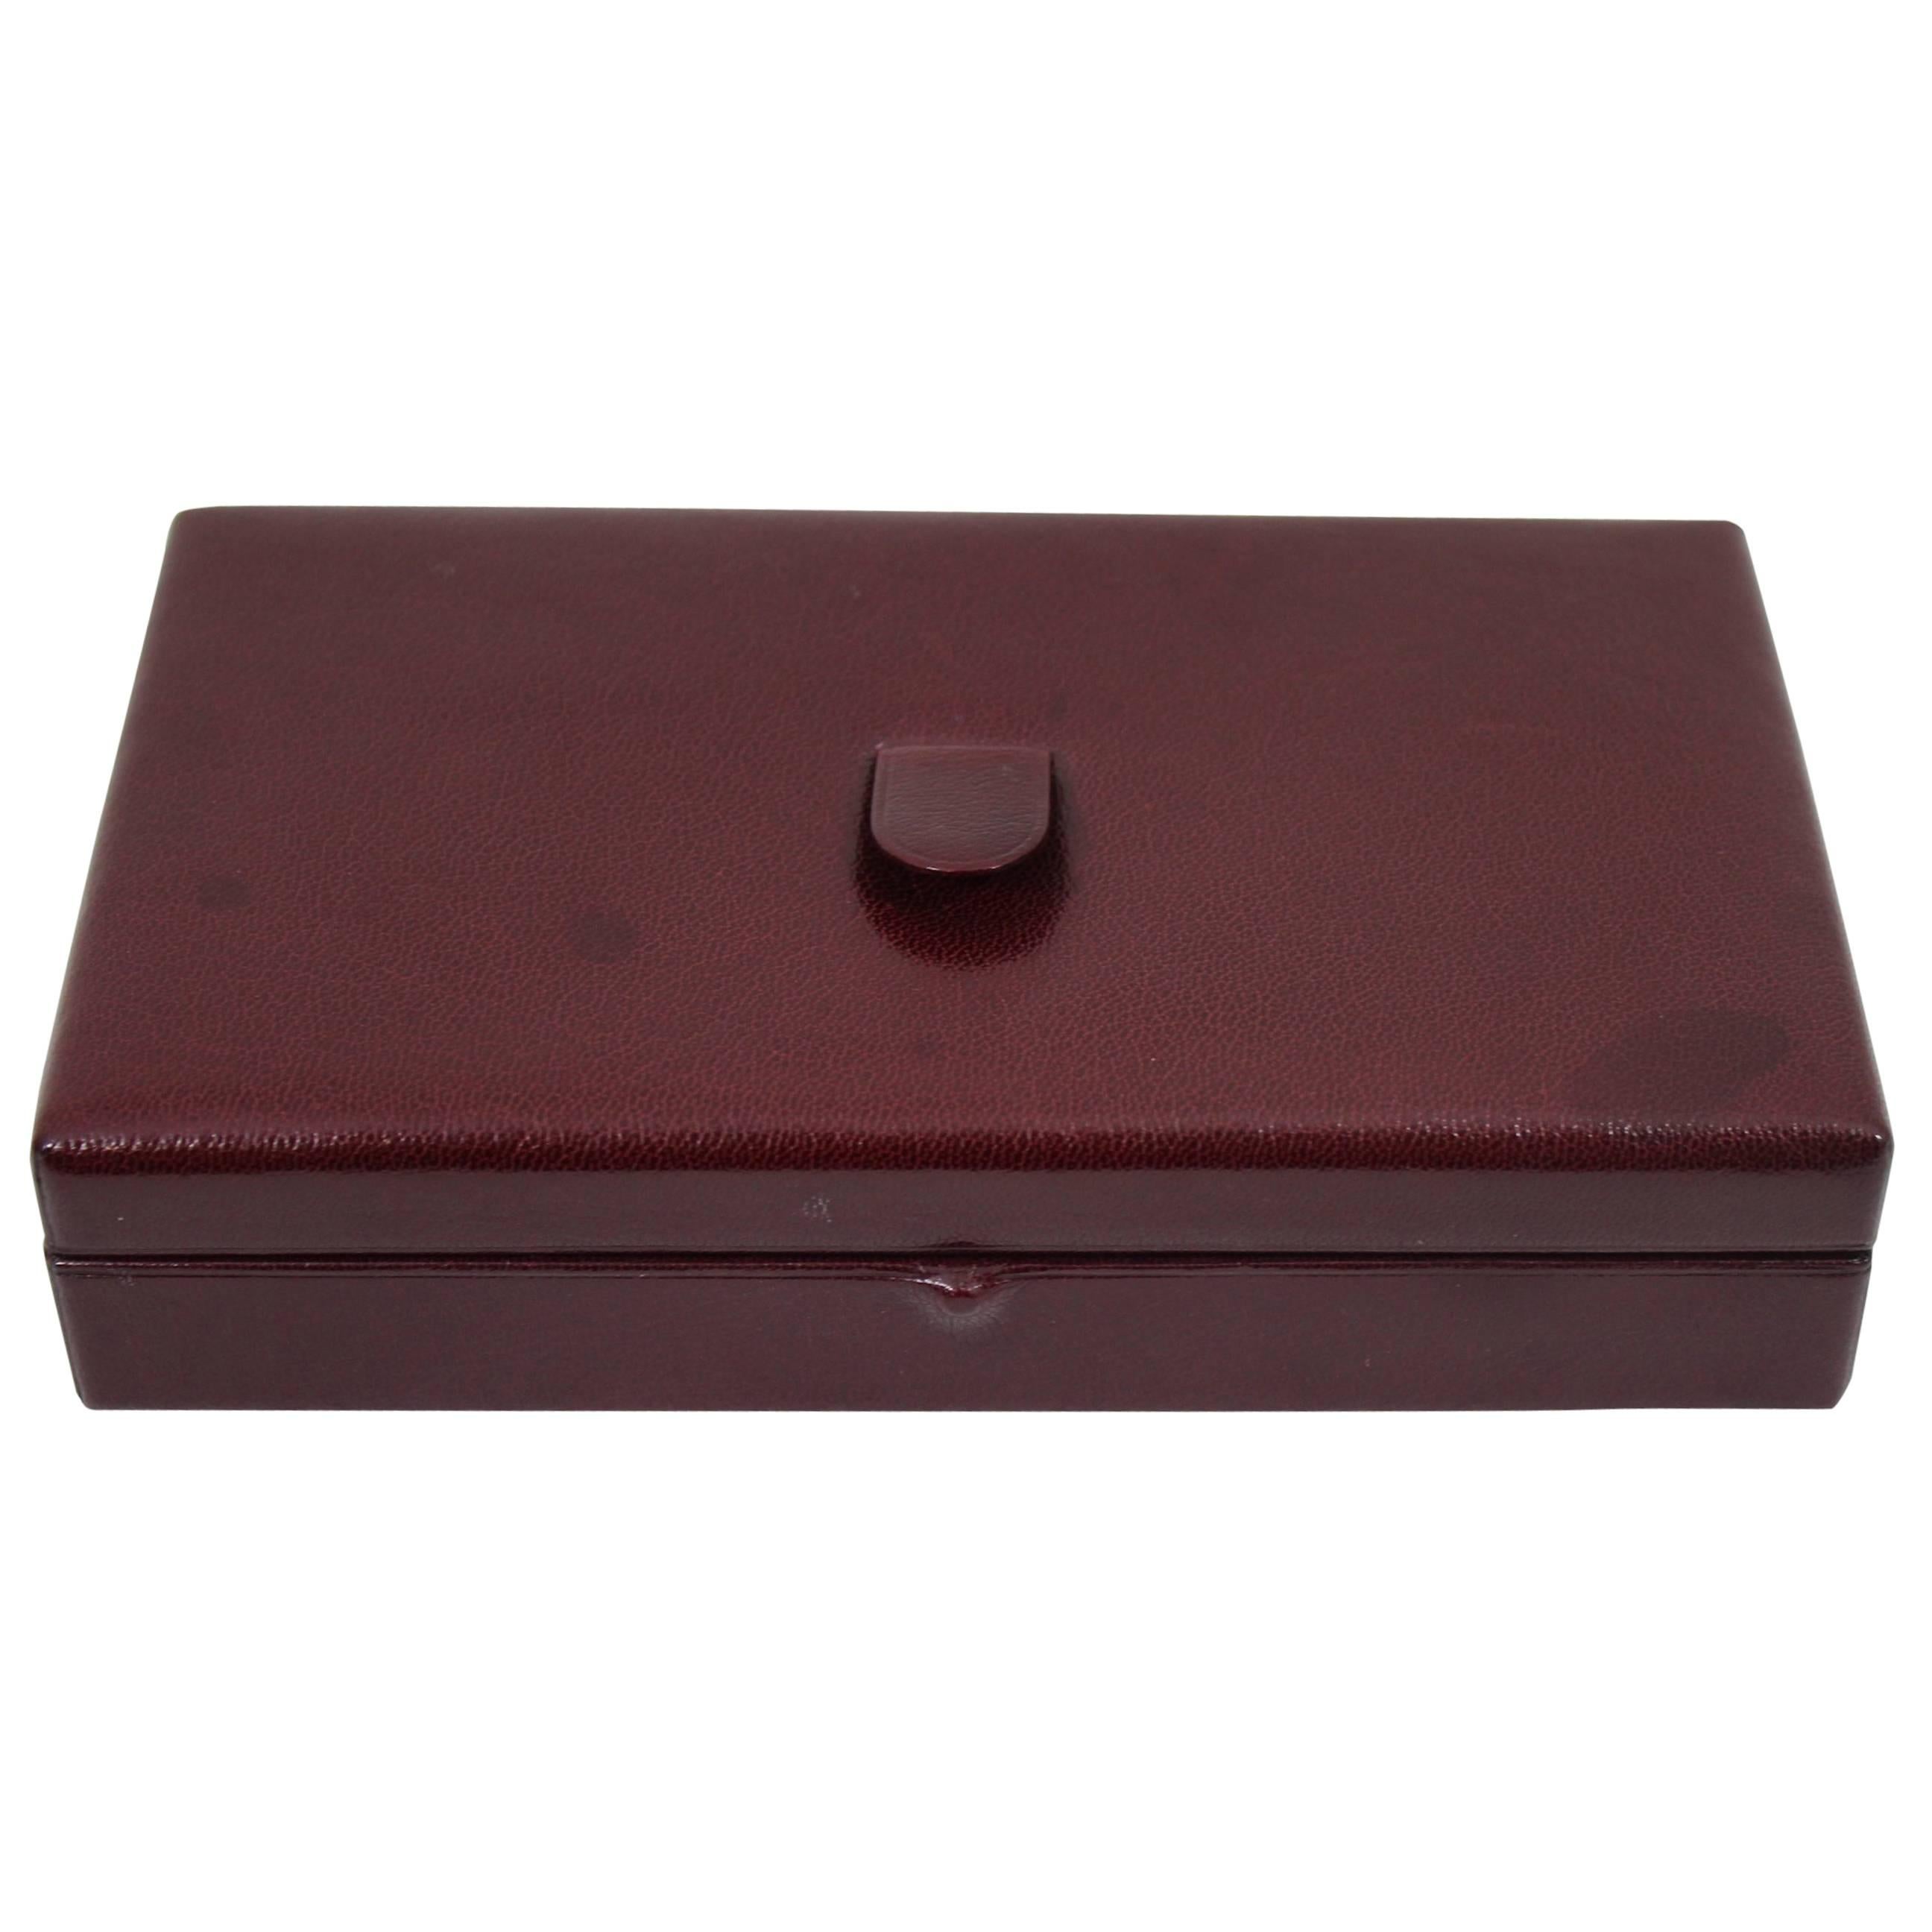 Hermes Small Jewelry case in Burgundy Box Leather